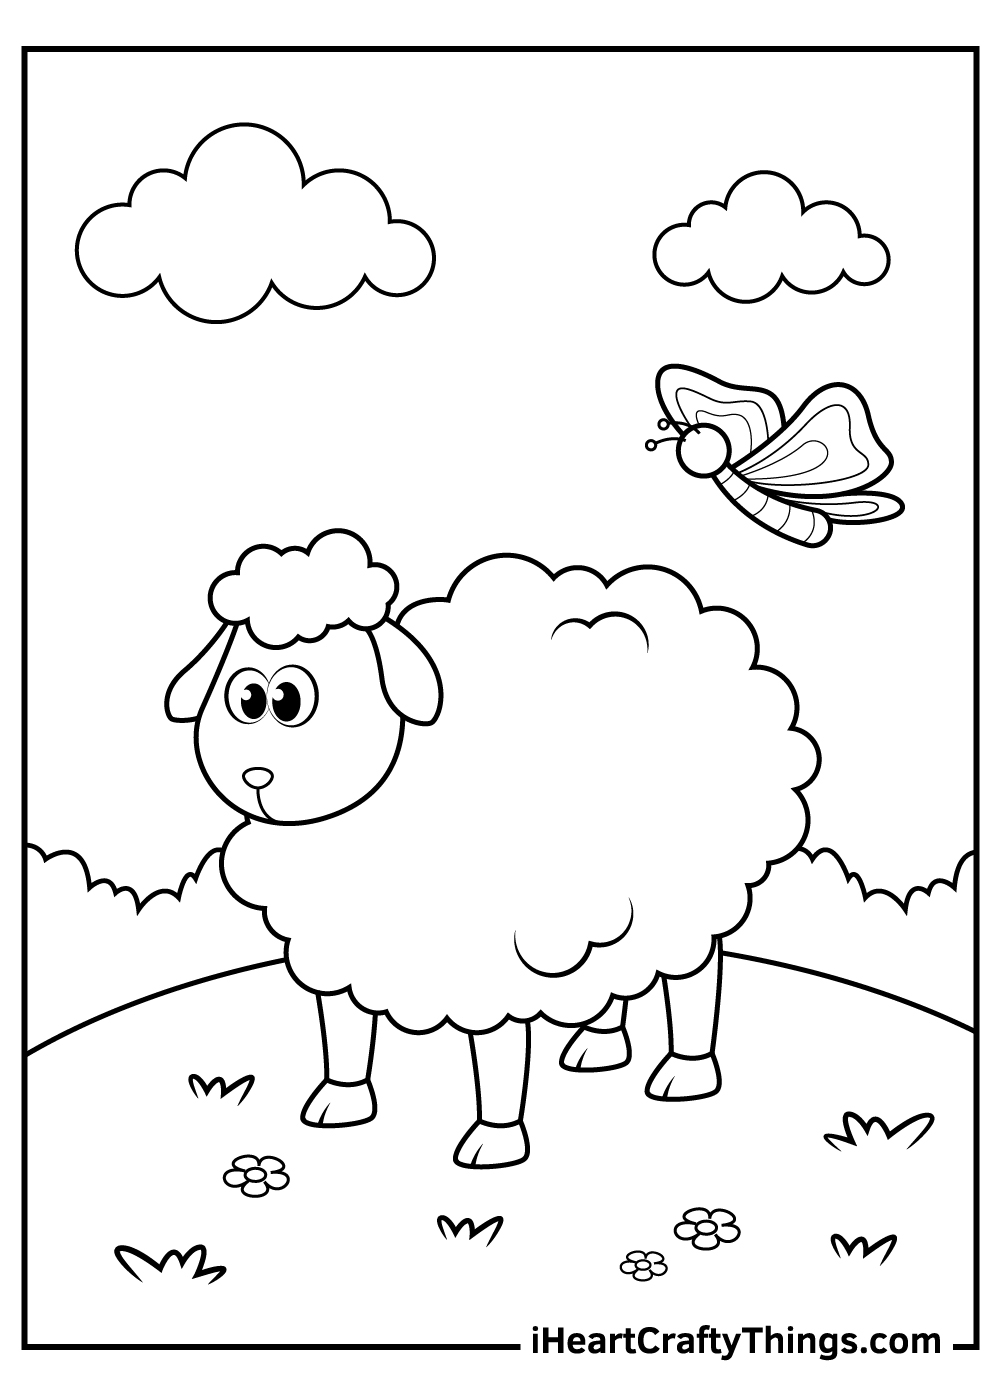 Sheep coloring pages free printables